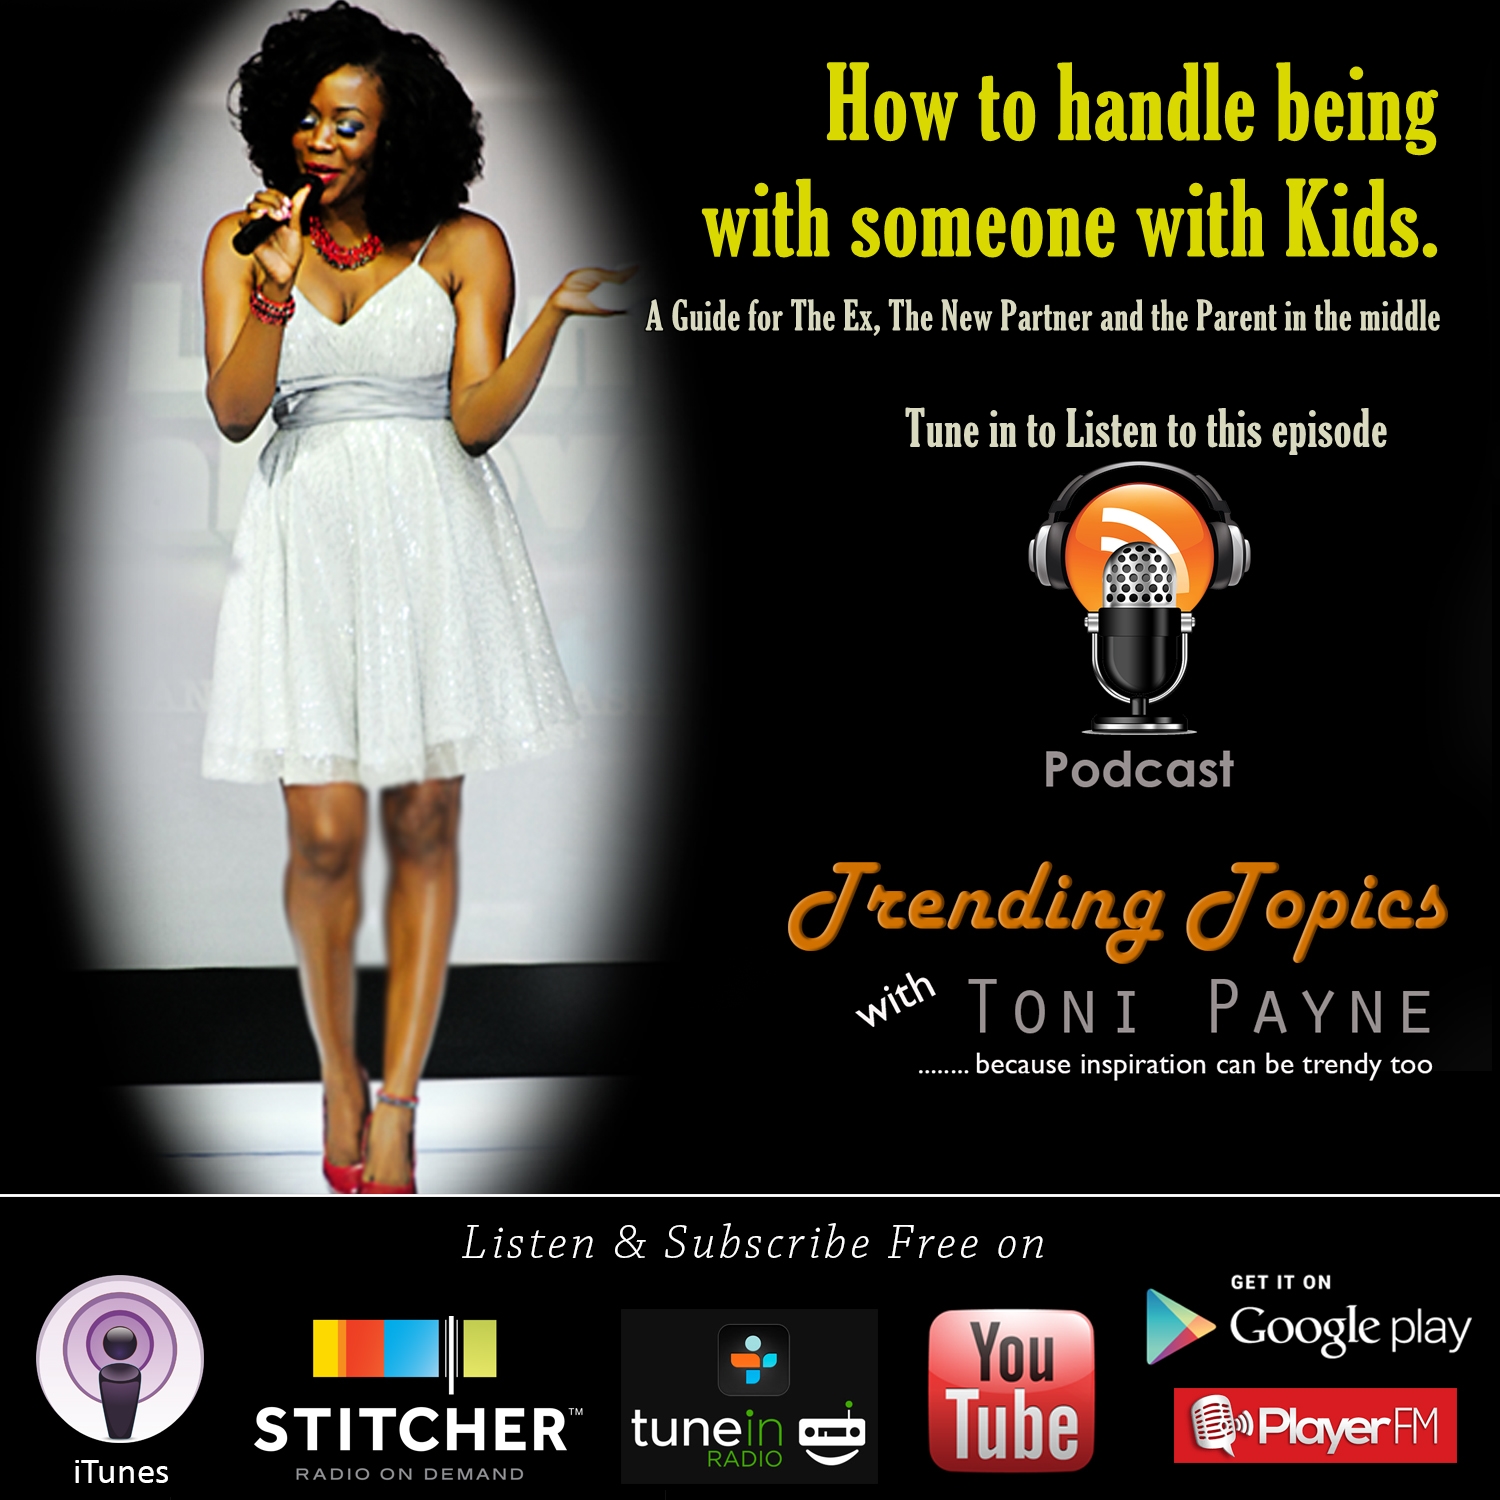 How to handle being with someone with kids podcast 21 tt w toni payne